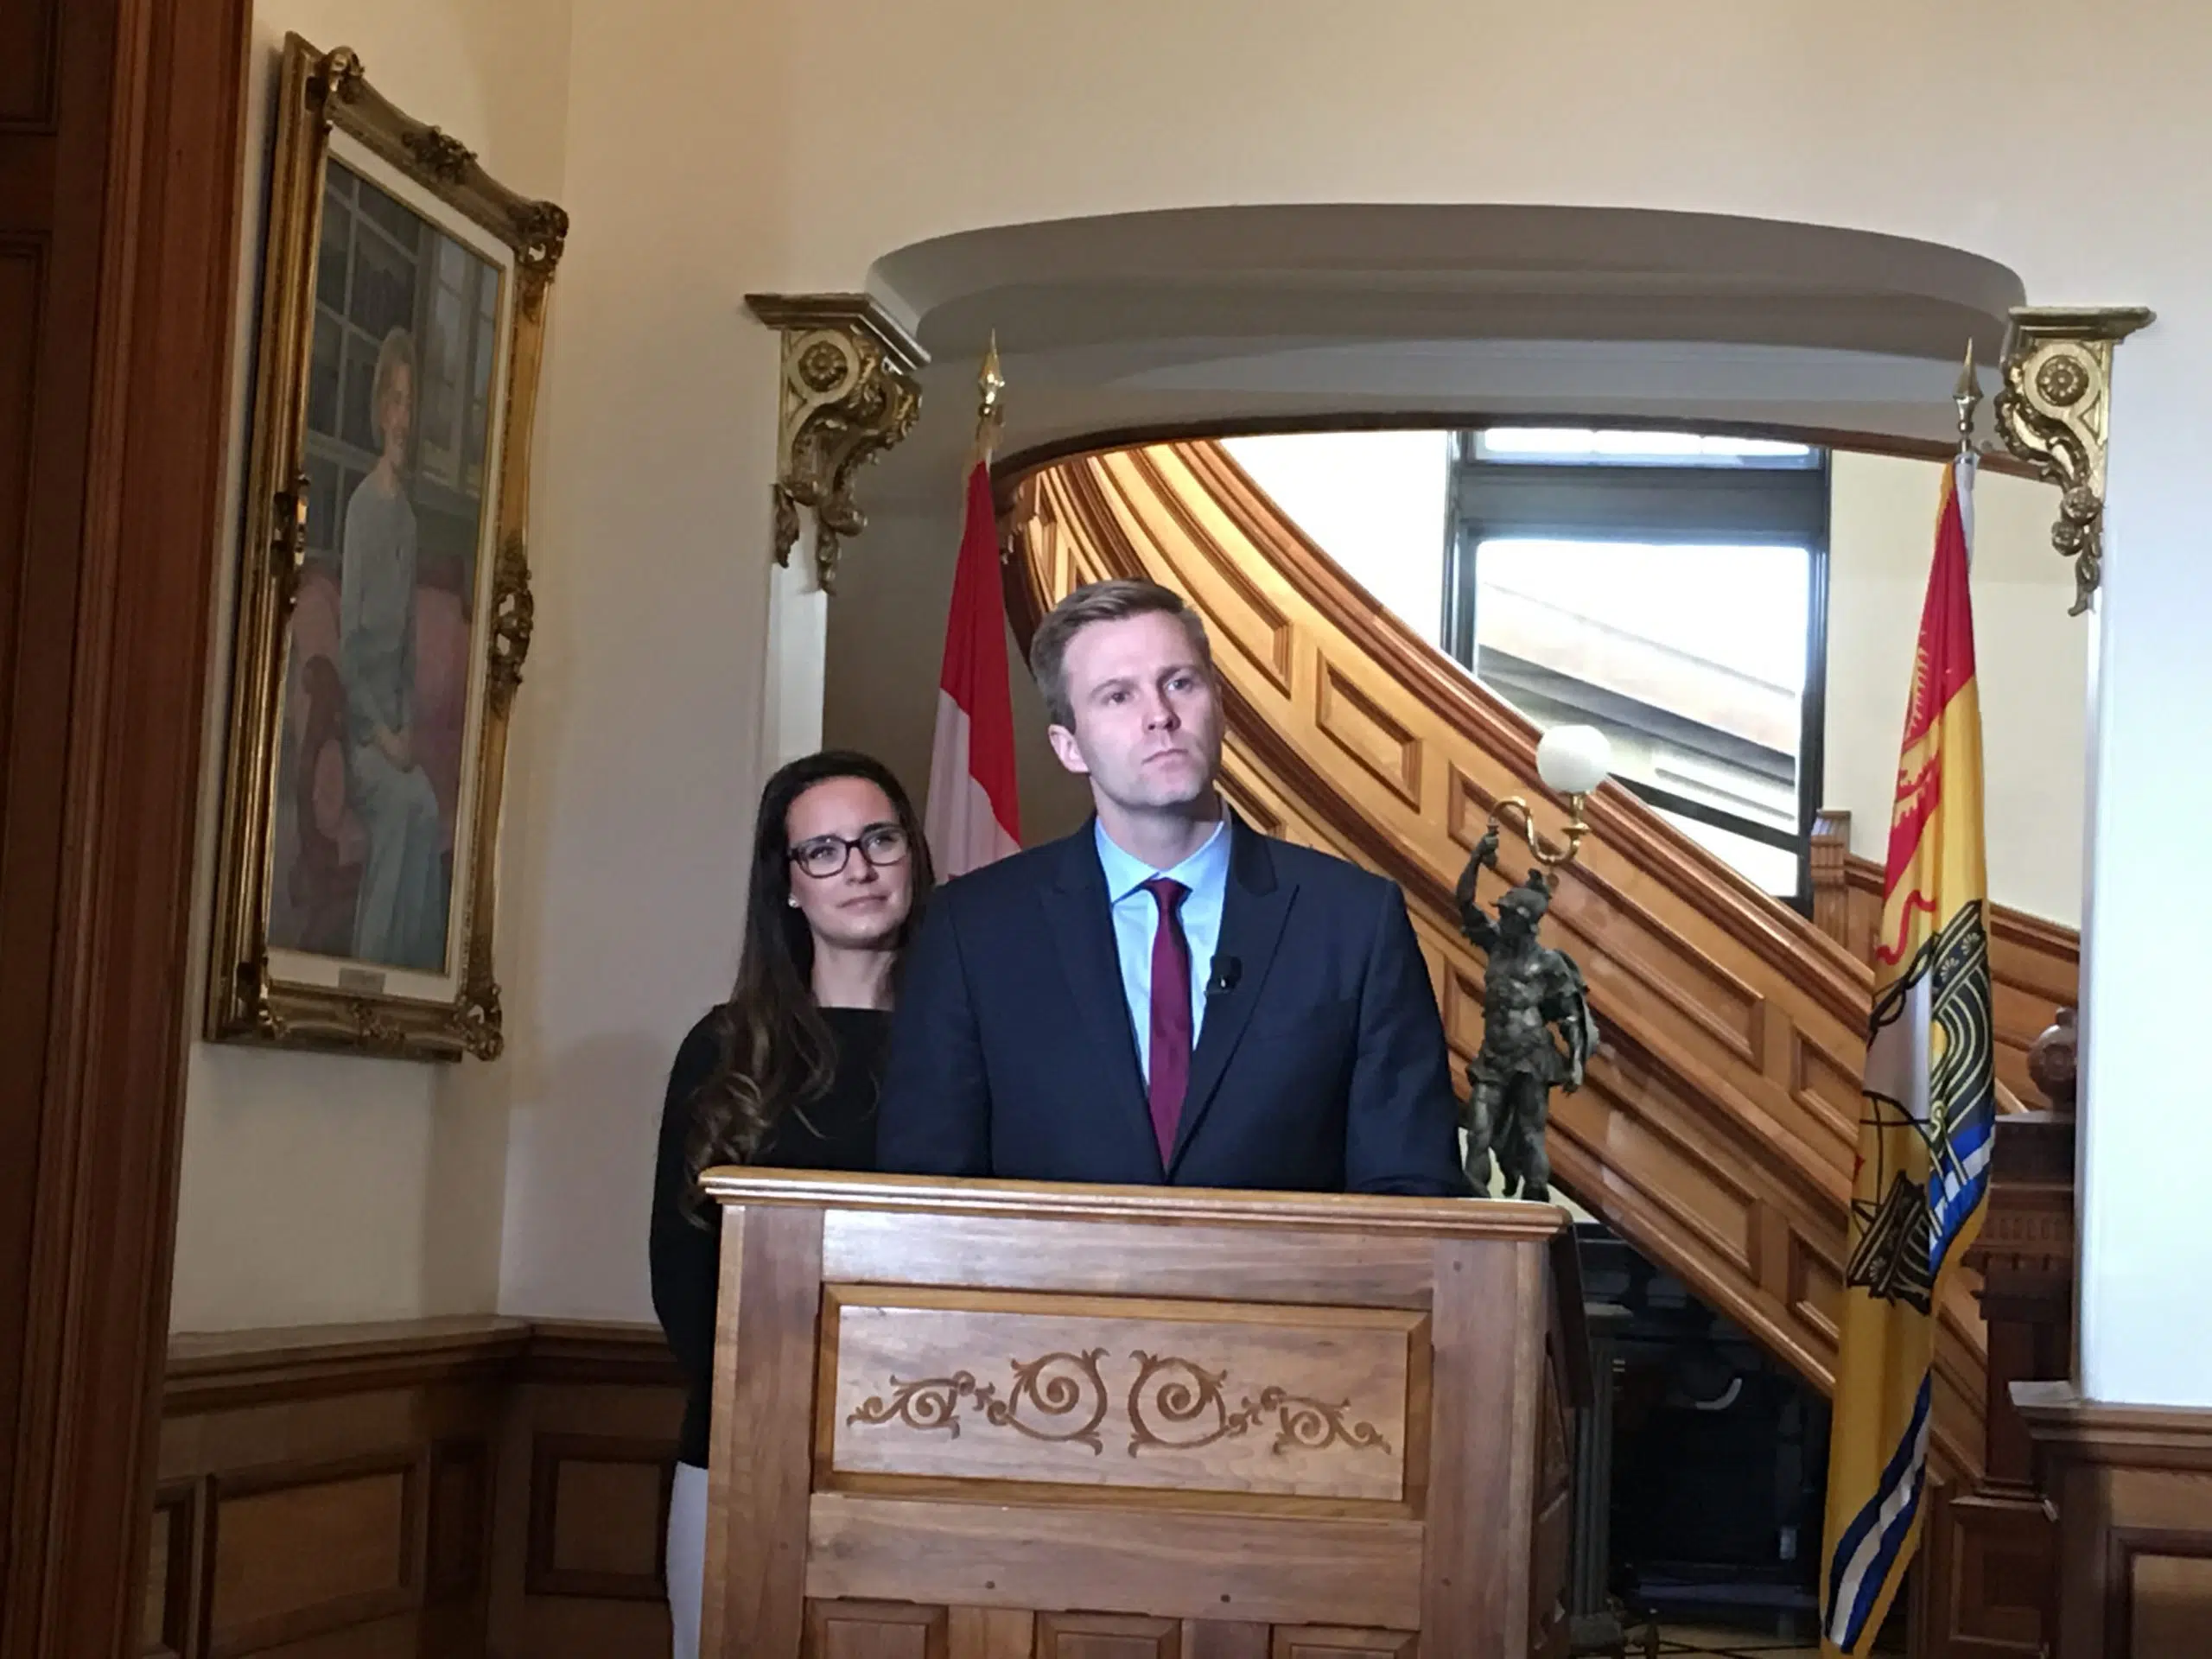 UPDATED: Brian Gallant Will Step Down After New Leader Chosen